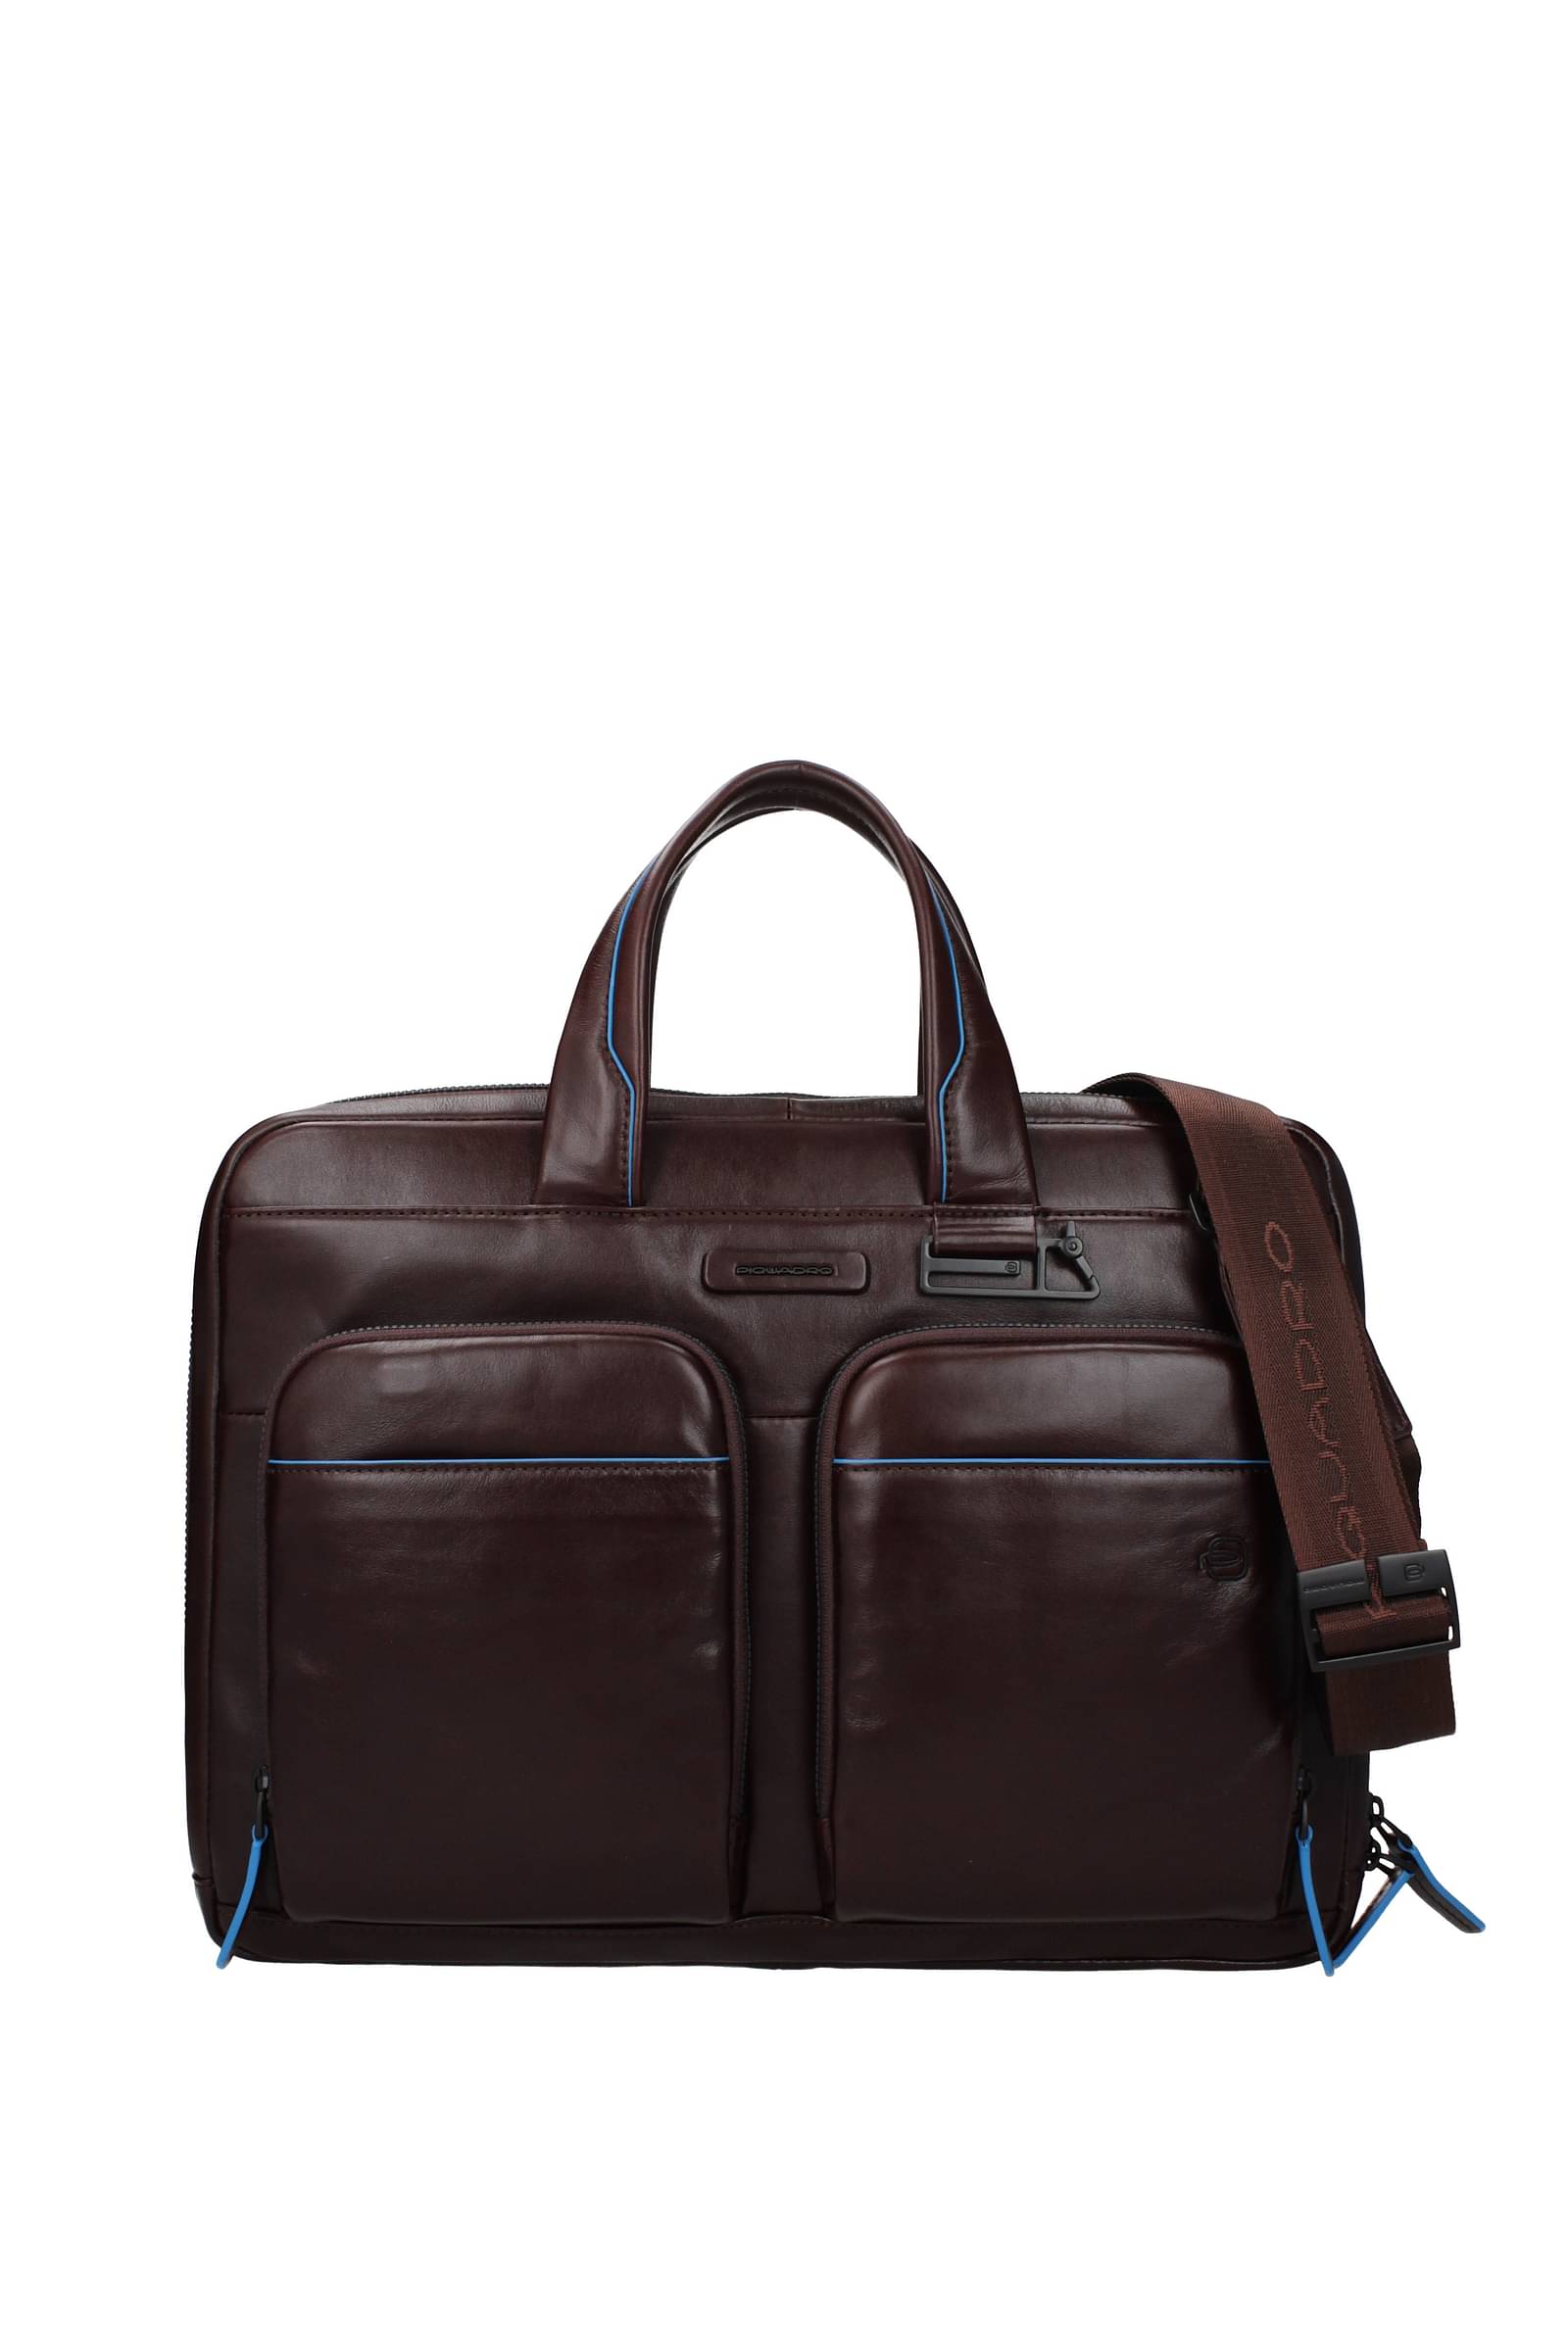 Bags for Men  25 Trendy and Stylish Models For All Needs